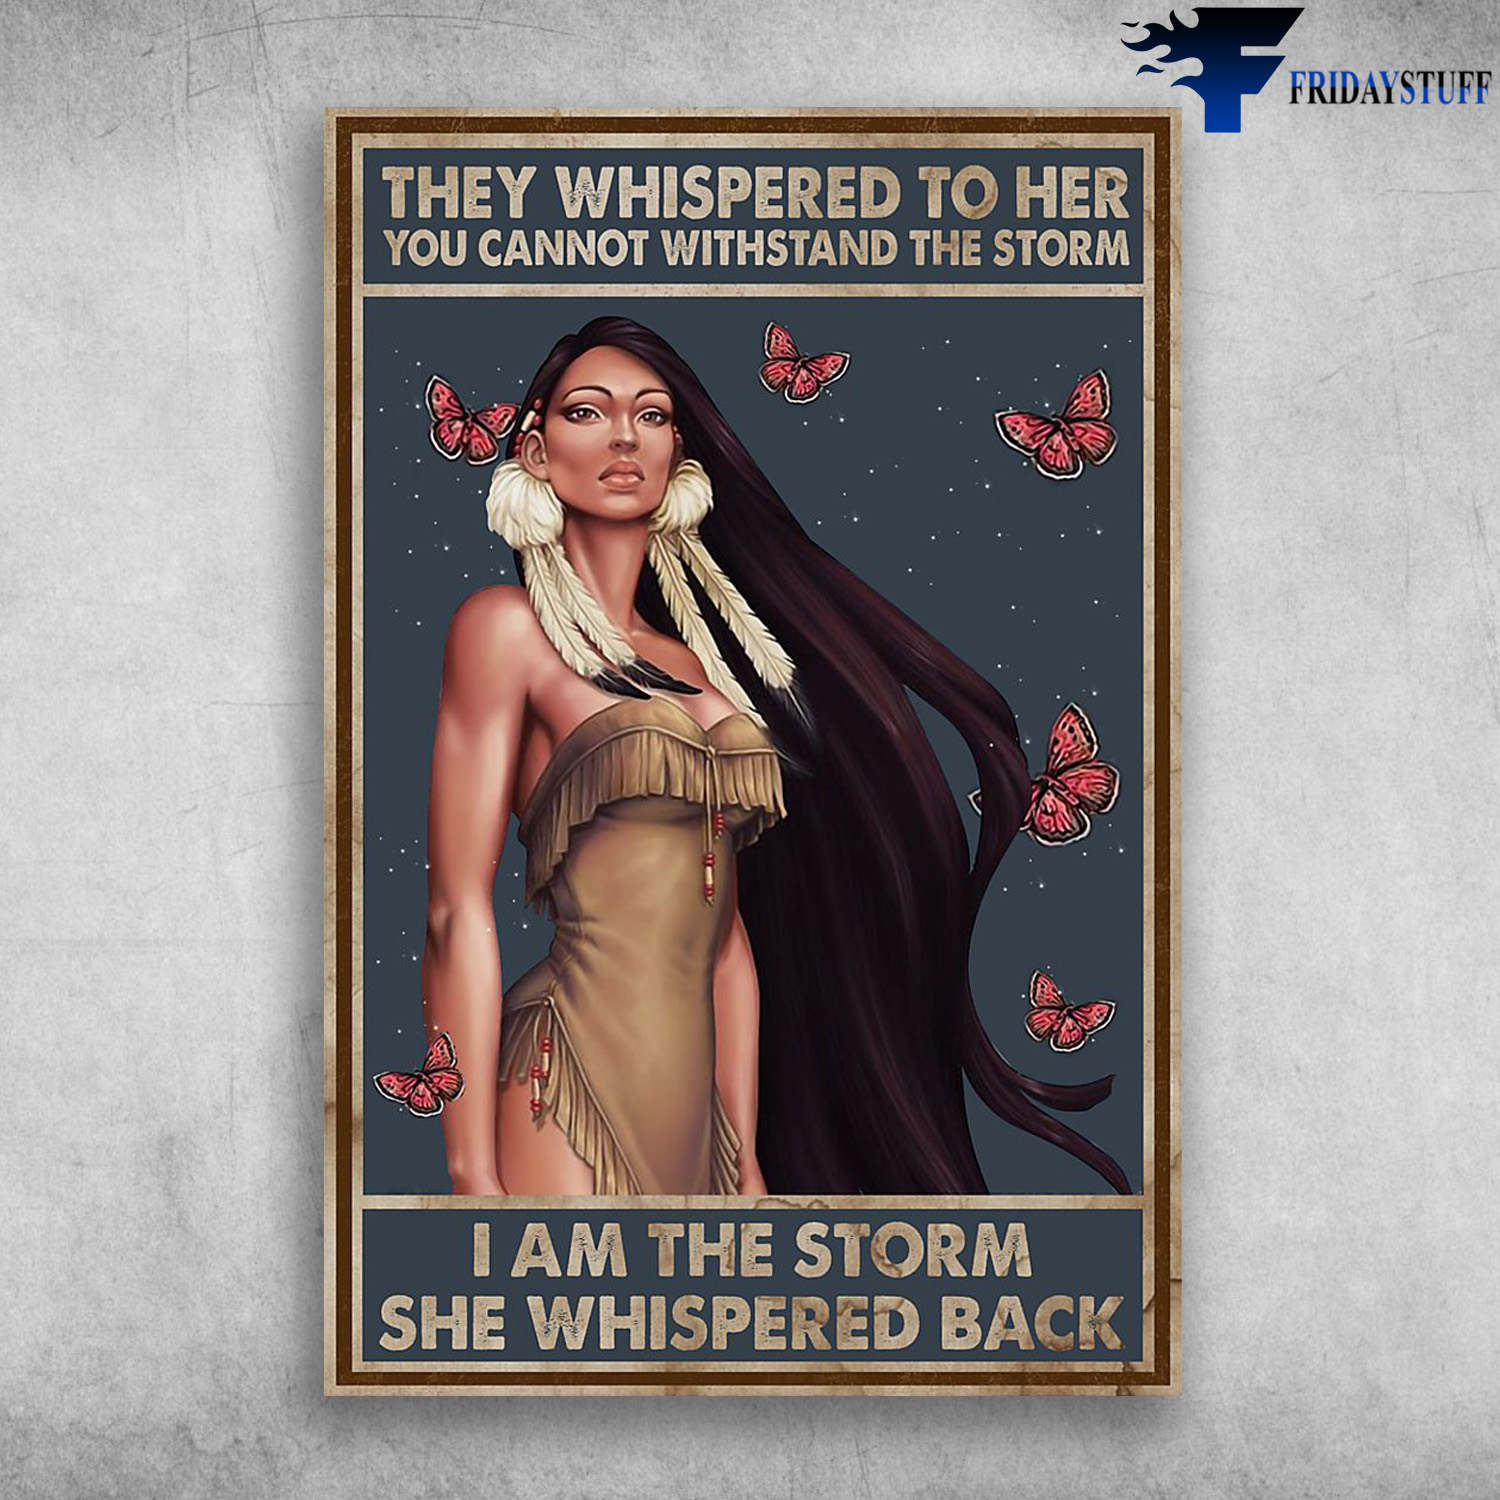 Native Americans - The Whispered To Her, You Cannot Withstand The Storm, I Am The Storm, She Whispered Back